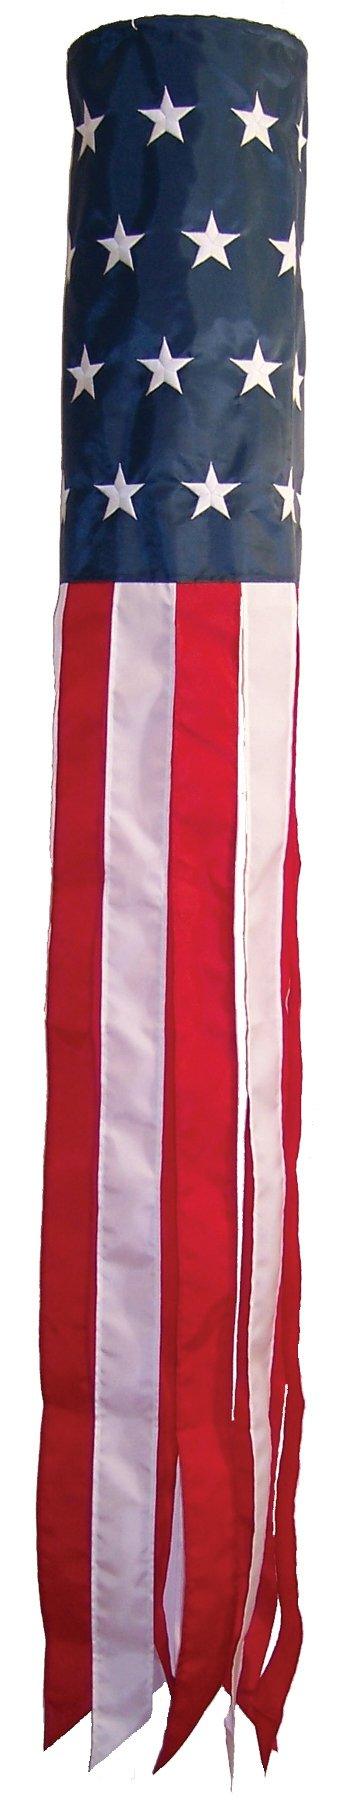 60 inch Embroidered Star Windsock - Kitty Hawk Kites Online Store